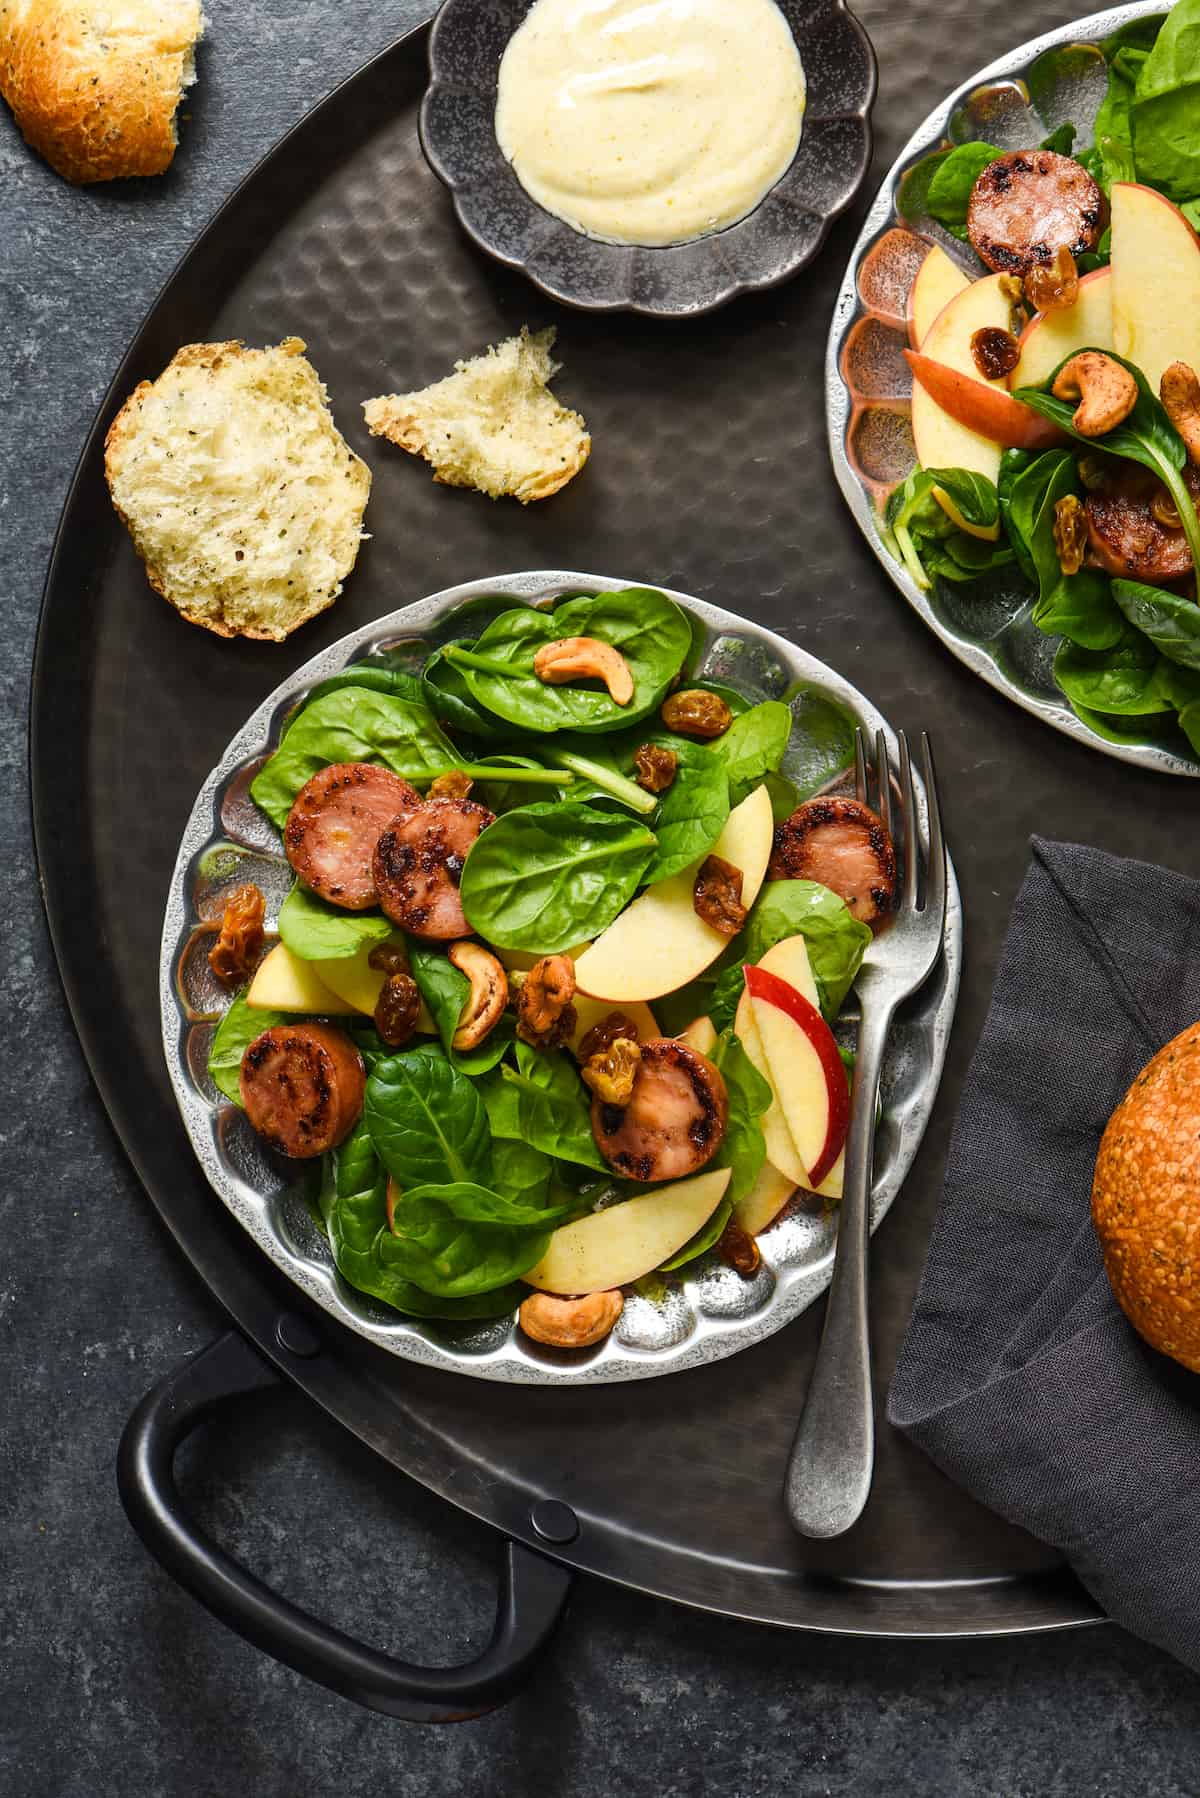 Apple Sausage Salad with Curry Yogurt Dressing - Chances are, you probably have most of the ingredients for this fresh and healthy meal in your kitchen right now. Spinach, sausage, apples, raisins and spiced cashews are served with an easy curry yogurt dressing. | foxeslovelemons.com